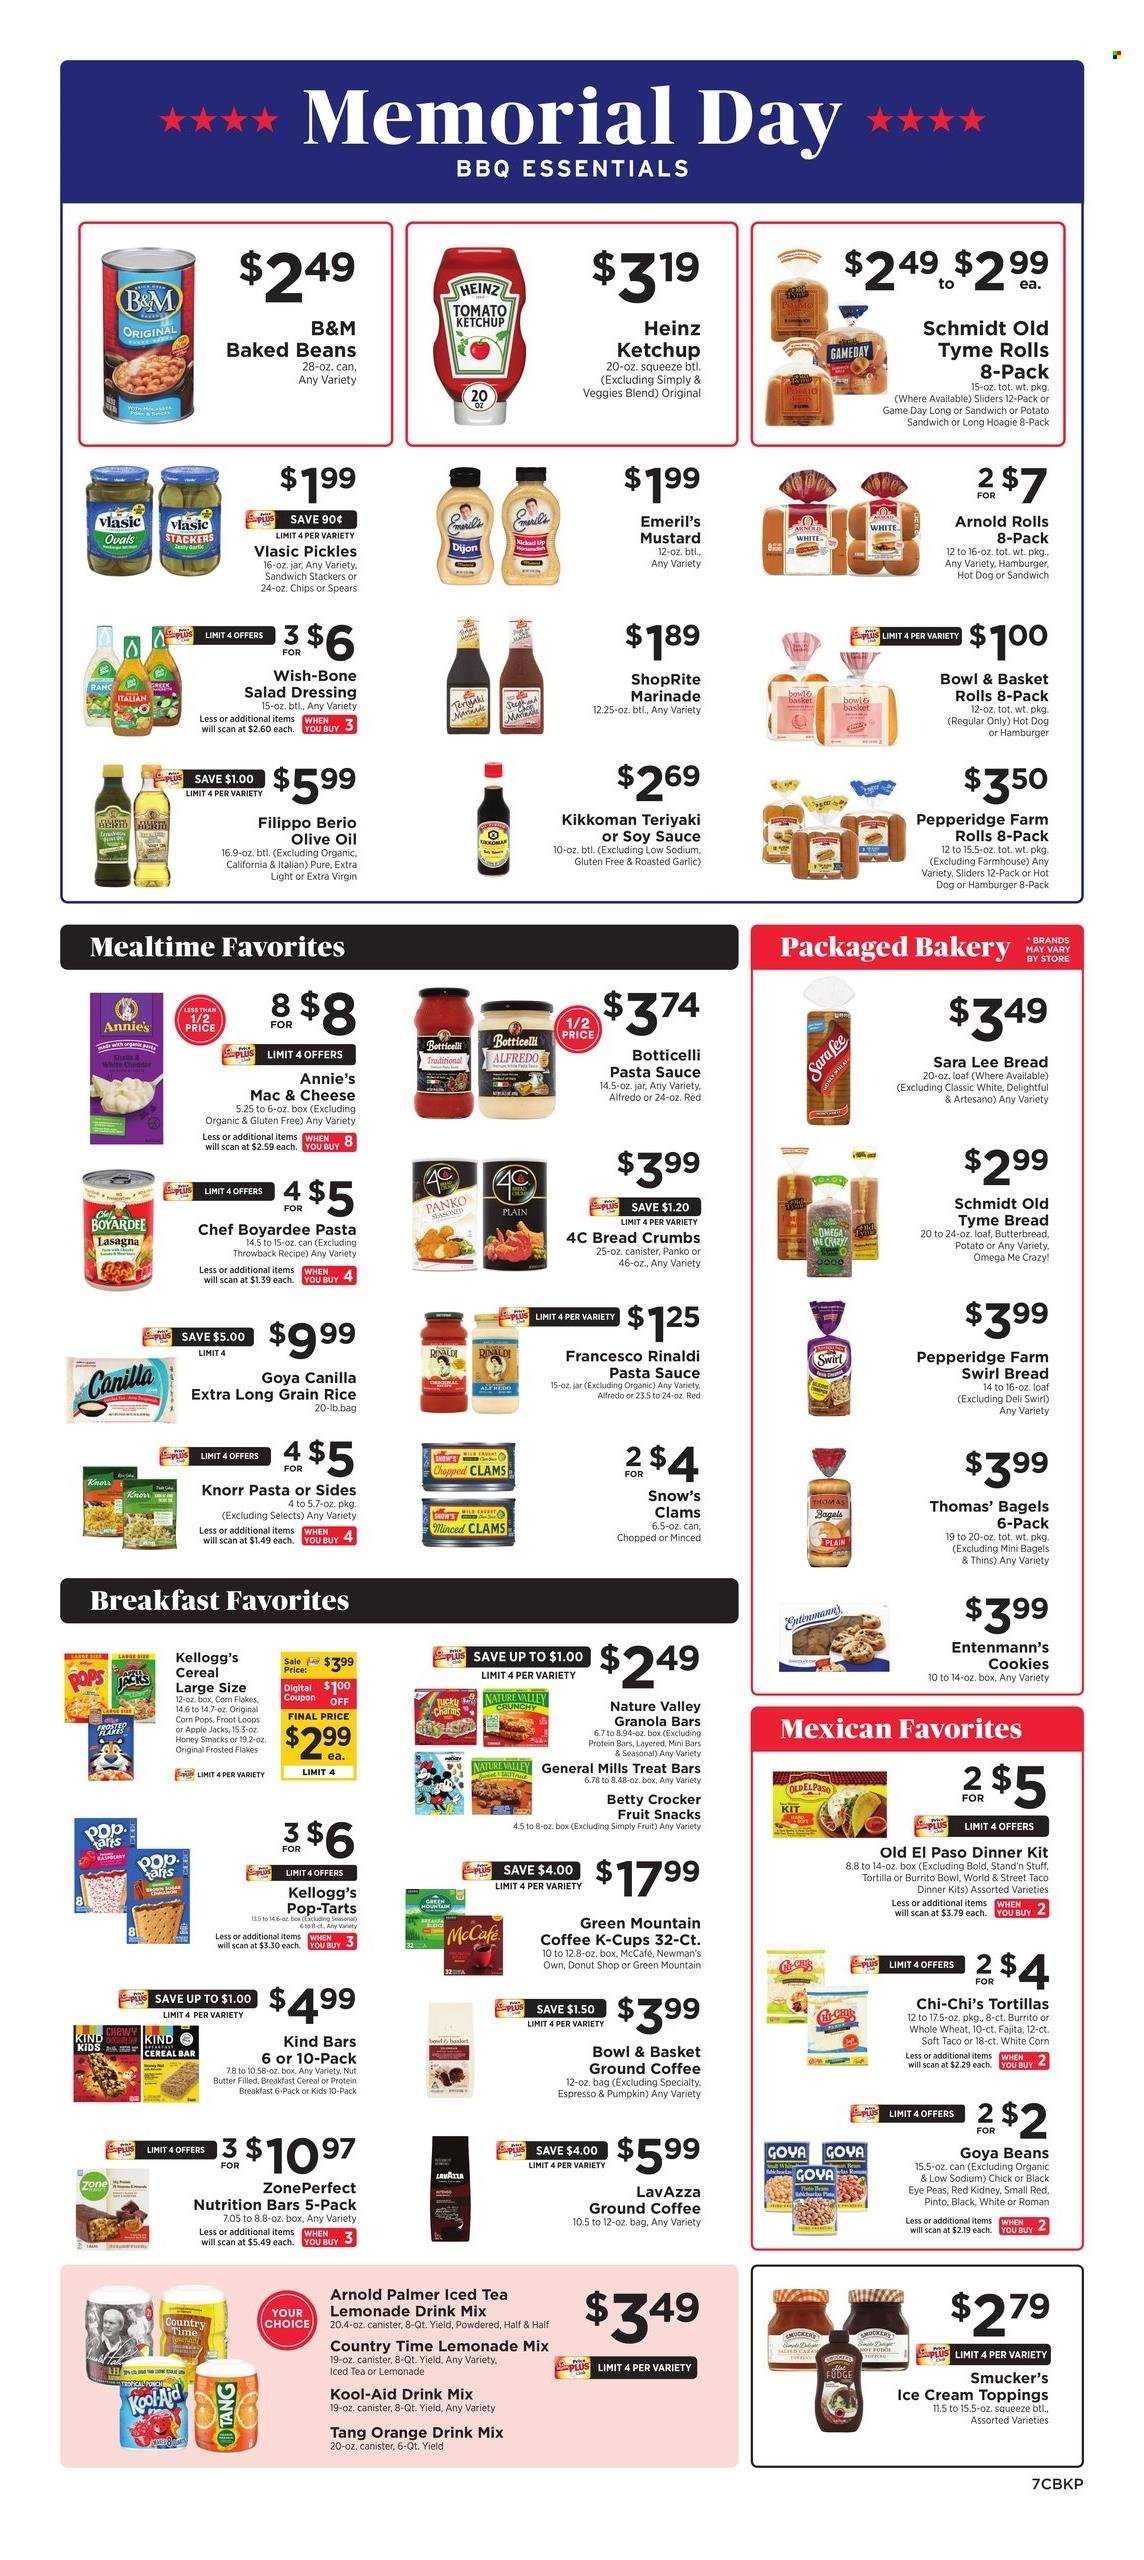 thumbnail - ShopRite Flyer - 05/26/2023 - 06/01/2023 - Sales products - bagels, tortillas, Old El Paso, Sara Lee, Bowl & Basket, Entenmann's, breadcrumbs, panko breadcrumbs, oranges, clams, hot dog, pasta sauce, hamburger, Knorr, sauce, dinner kit, fajita, burrito, lasagna meal, Annie's, ice cream, cookies, fudge, cereal bar, Kellogg's, Pop-Tarts, fruit snack, General Mills, chips, Thins, Heinz, pickles, baked beans, Goya, Chef Boyardee, cereals, nutrition bar, corn flakes, protein bar, granola bar, Frosted Flakes, Corn Pops, Nature Valley, Zone Perfect, rice, long grain rice, mustard, salad dressing, soy sauce, ketchup, Kikkoman, dressing, marinade, extra virgin olive oil, olive oil, oil, honey, lemonade, ice tea, Country Time, powder drink, ground coffee, coffee capsules, McCafe, K-Cups, Lavazza, Green Mountain, Half and half. Page 7.